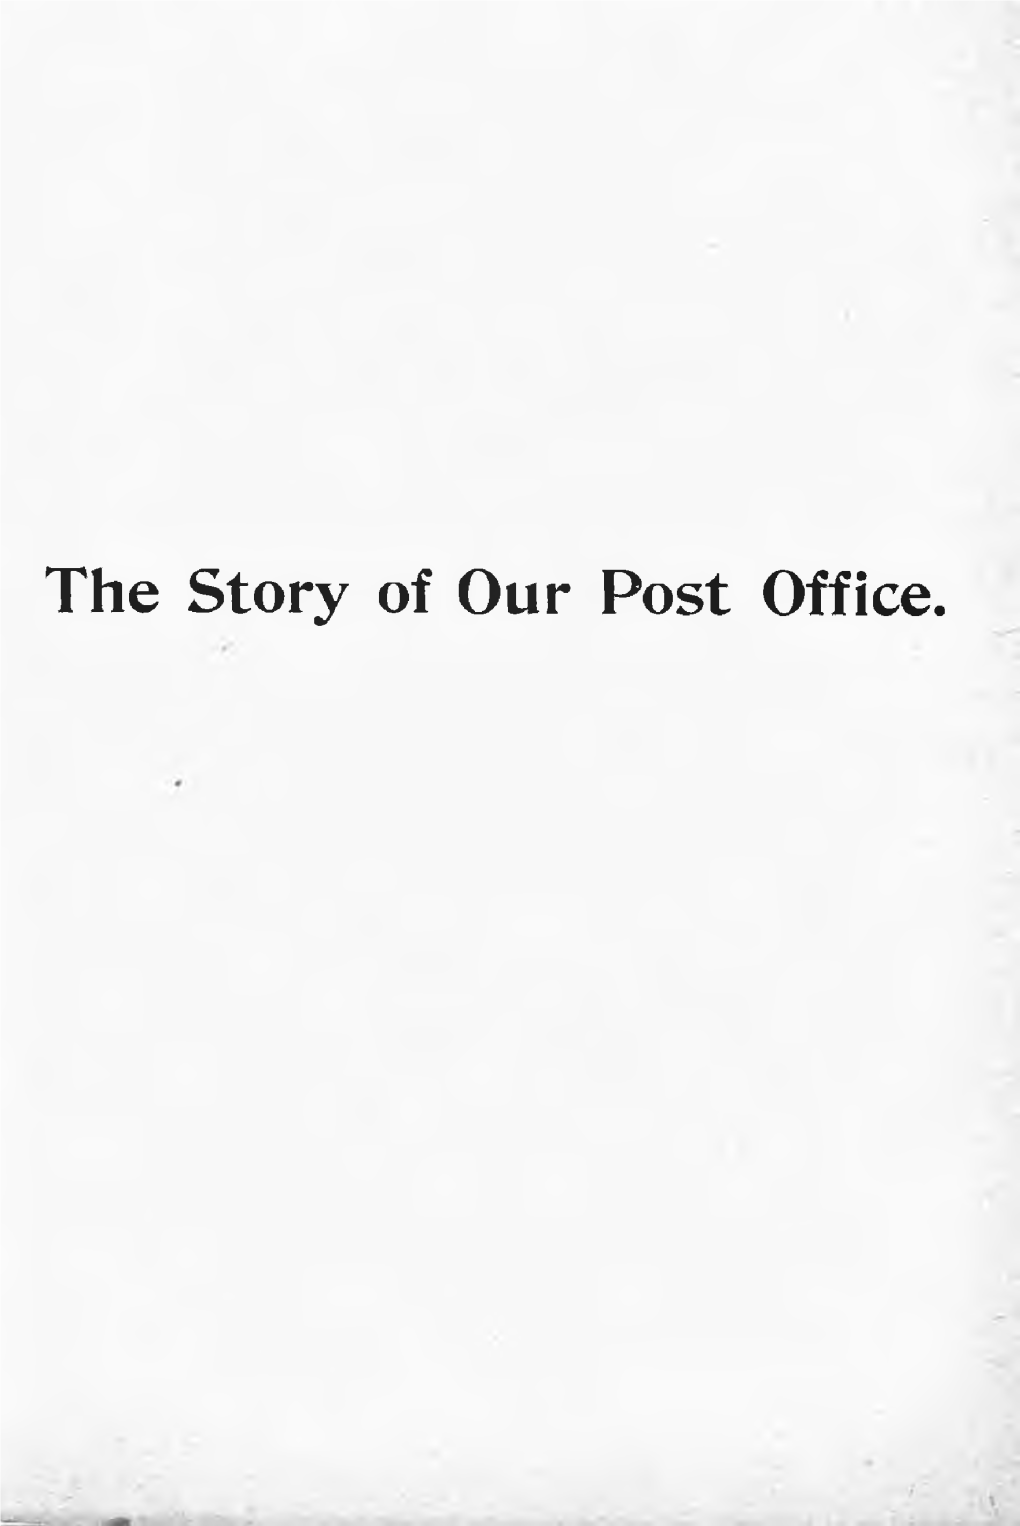 The Story of Our Post Office